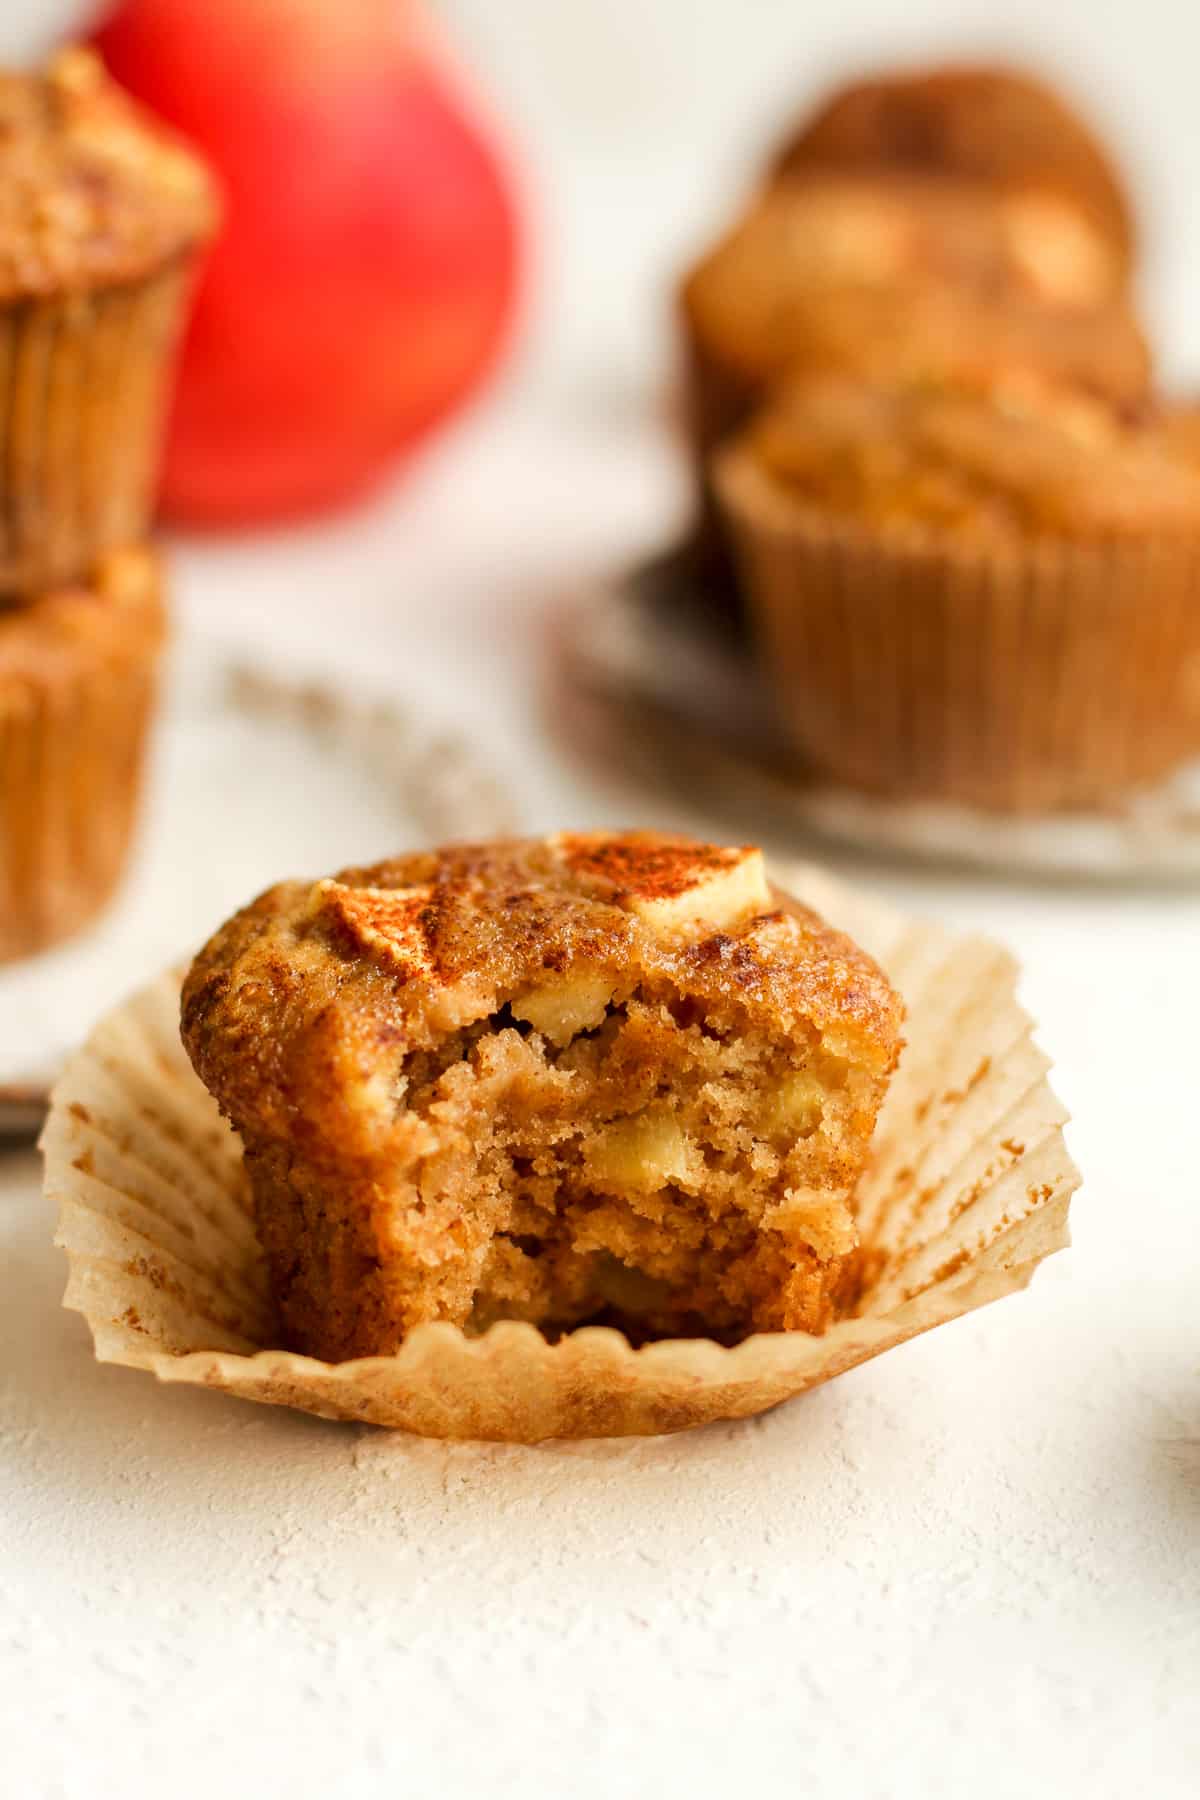 Side view of a partially eaten apple muffin.